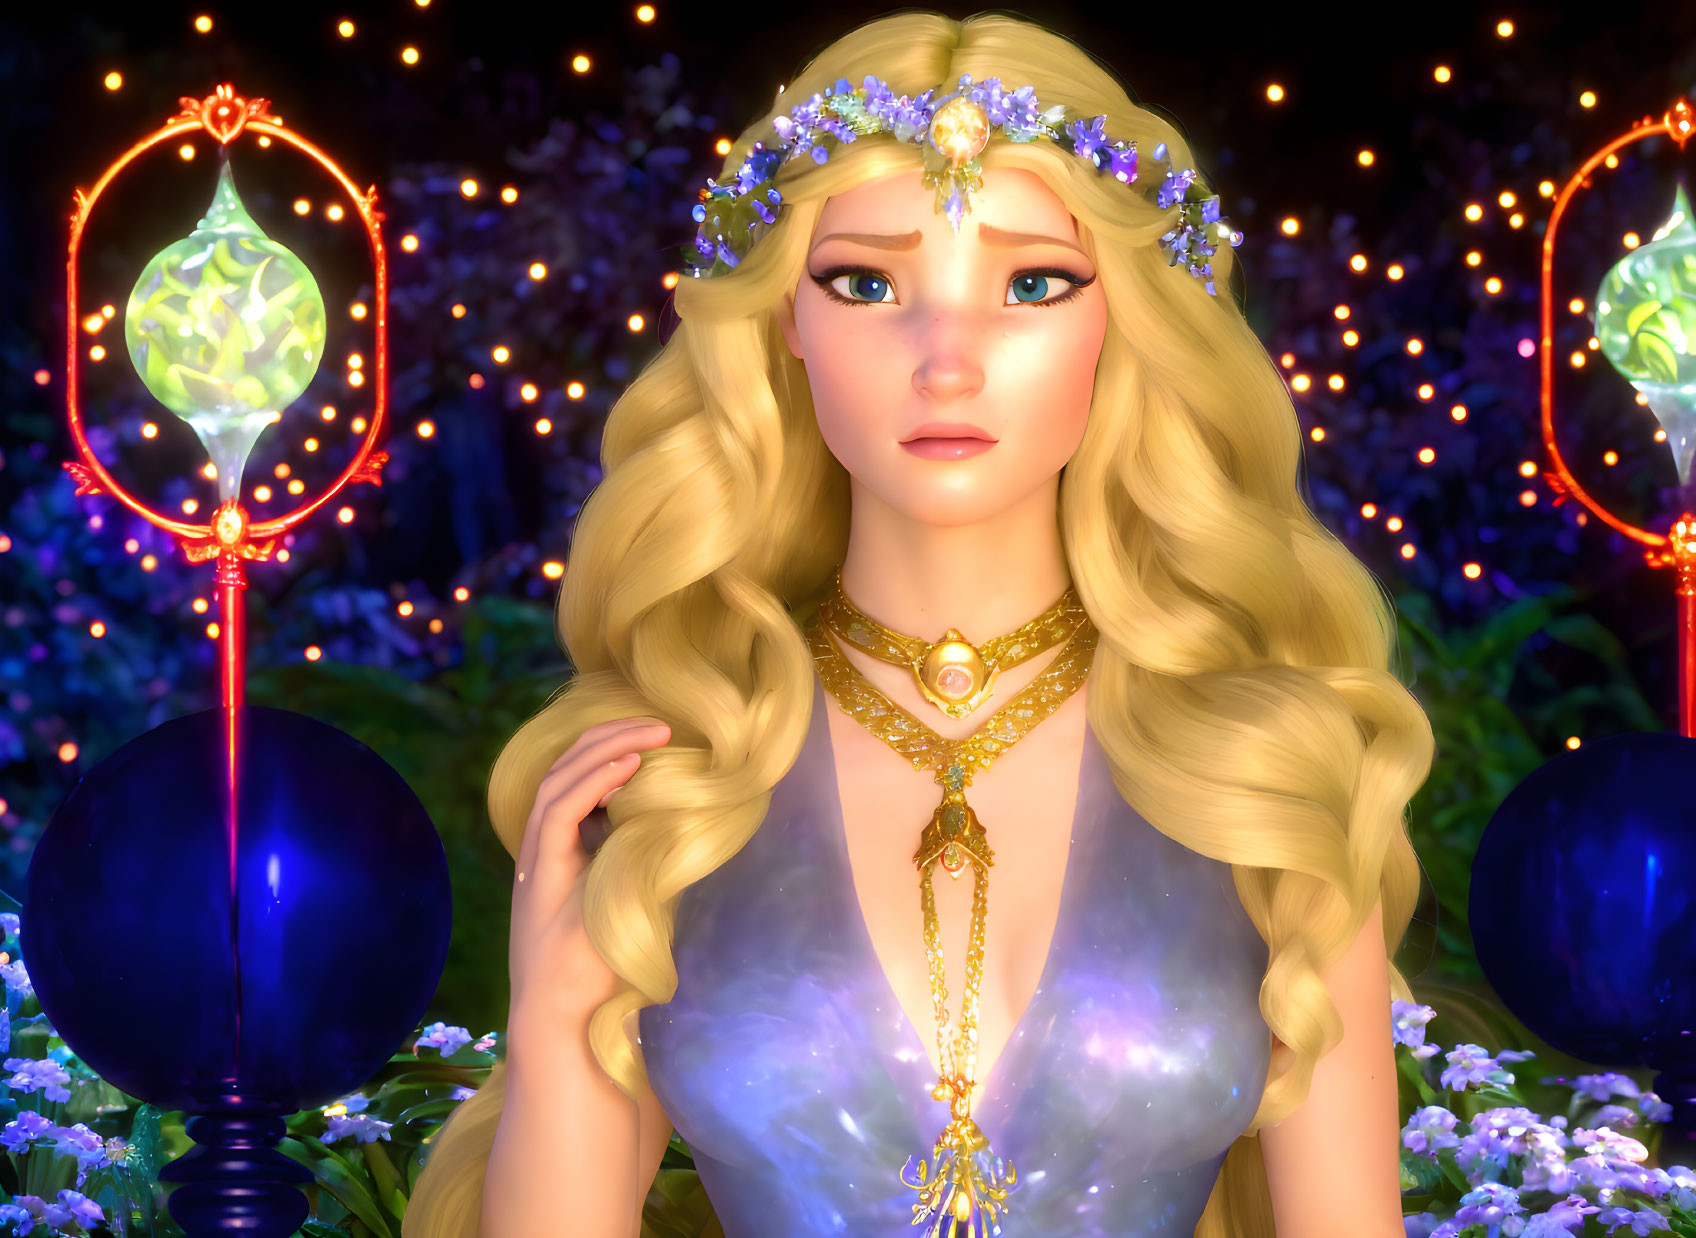 Ethereal blonde woman with flower crown in magical night scene